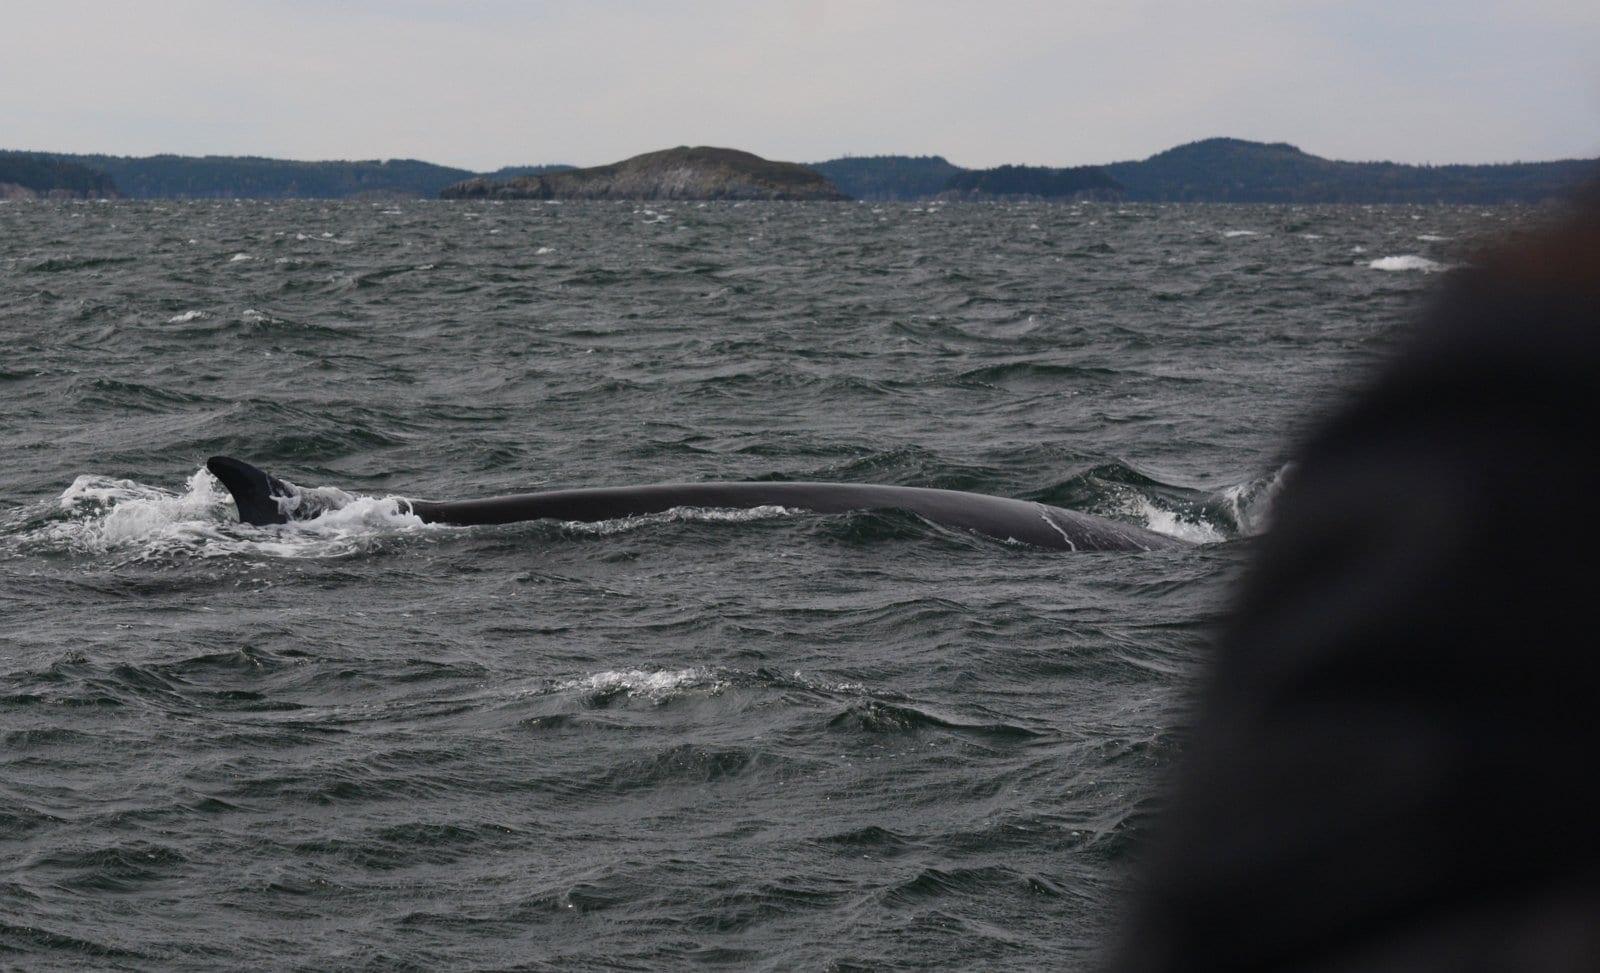 photographing fin whales from the lower deck 